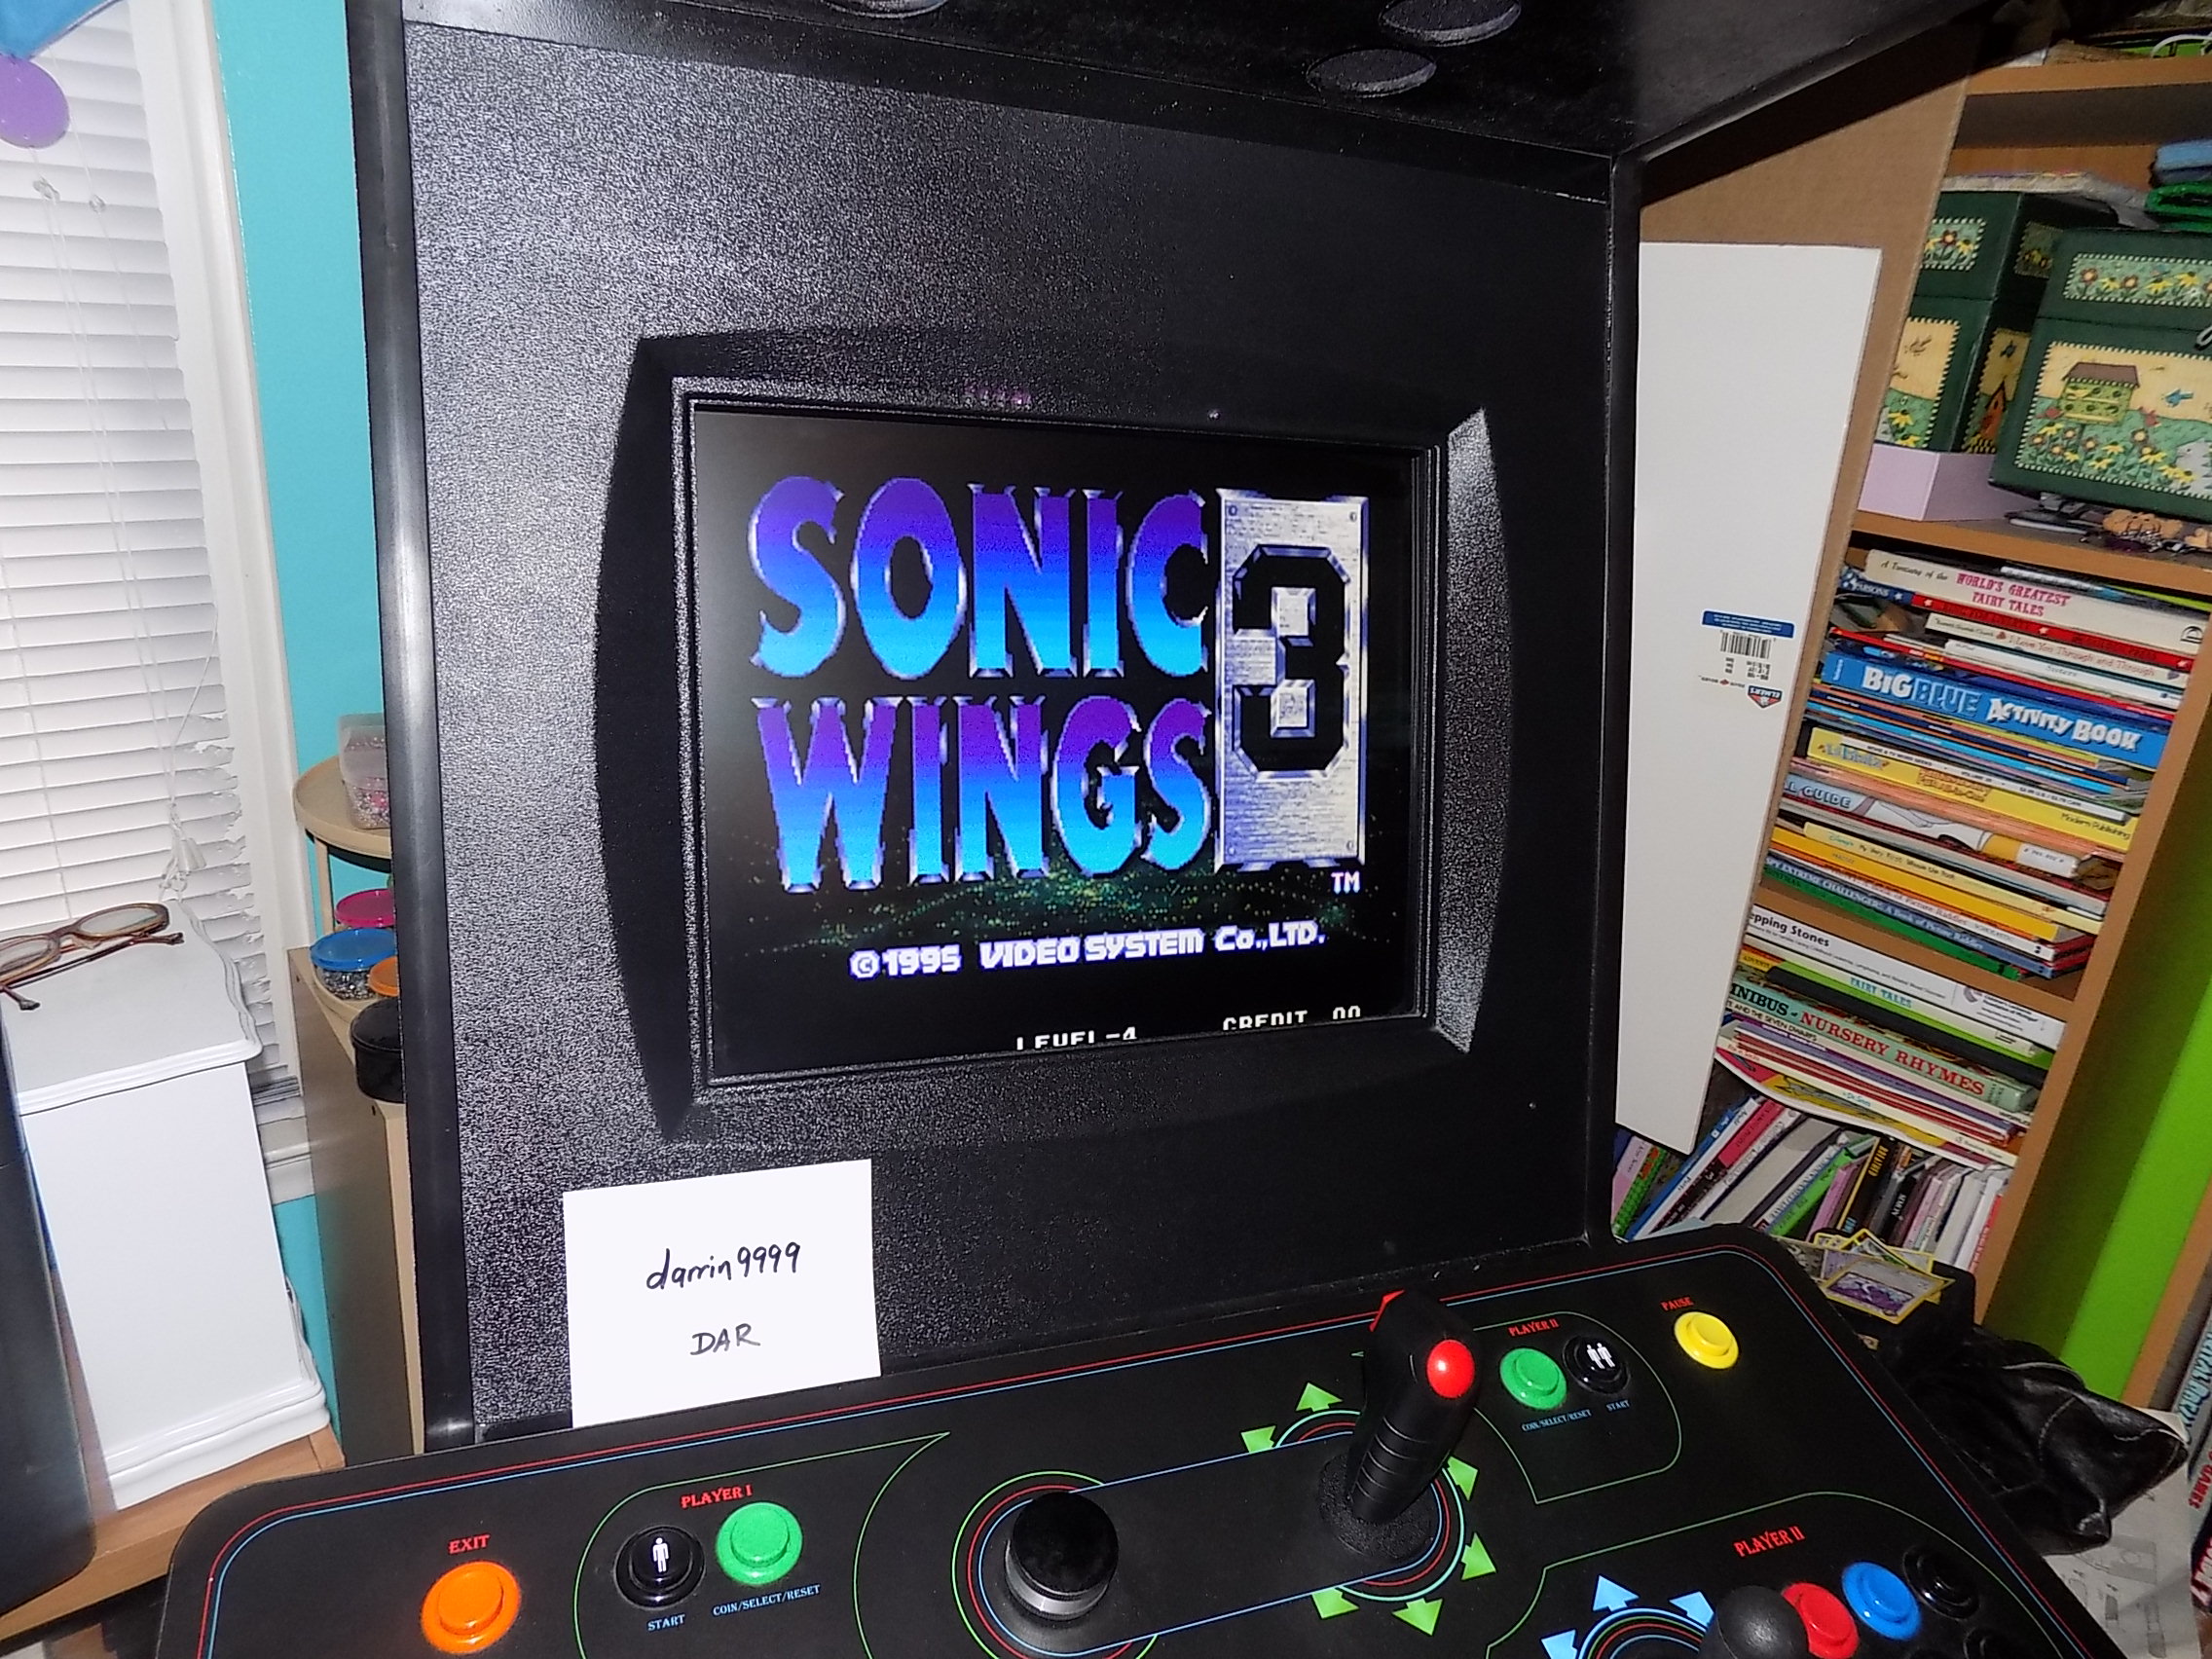 darrin9999: Aero Fighters 3 / Sonic Wings 3  [Arcade] [sonicwi3] (Arcade Emulated / M.A.M.E.) 109,900 points on 2018-04-15 15:28:59